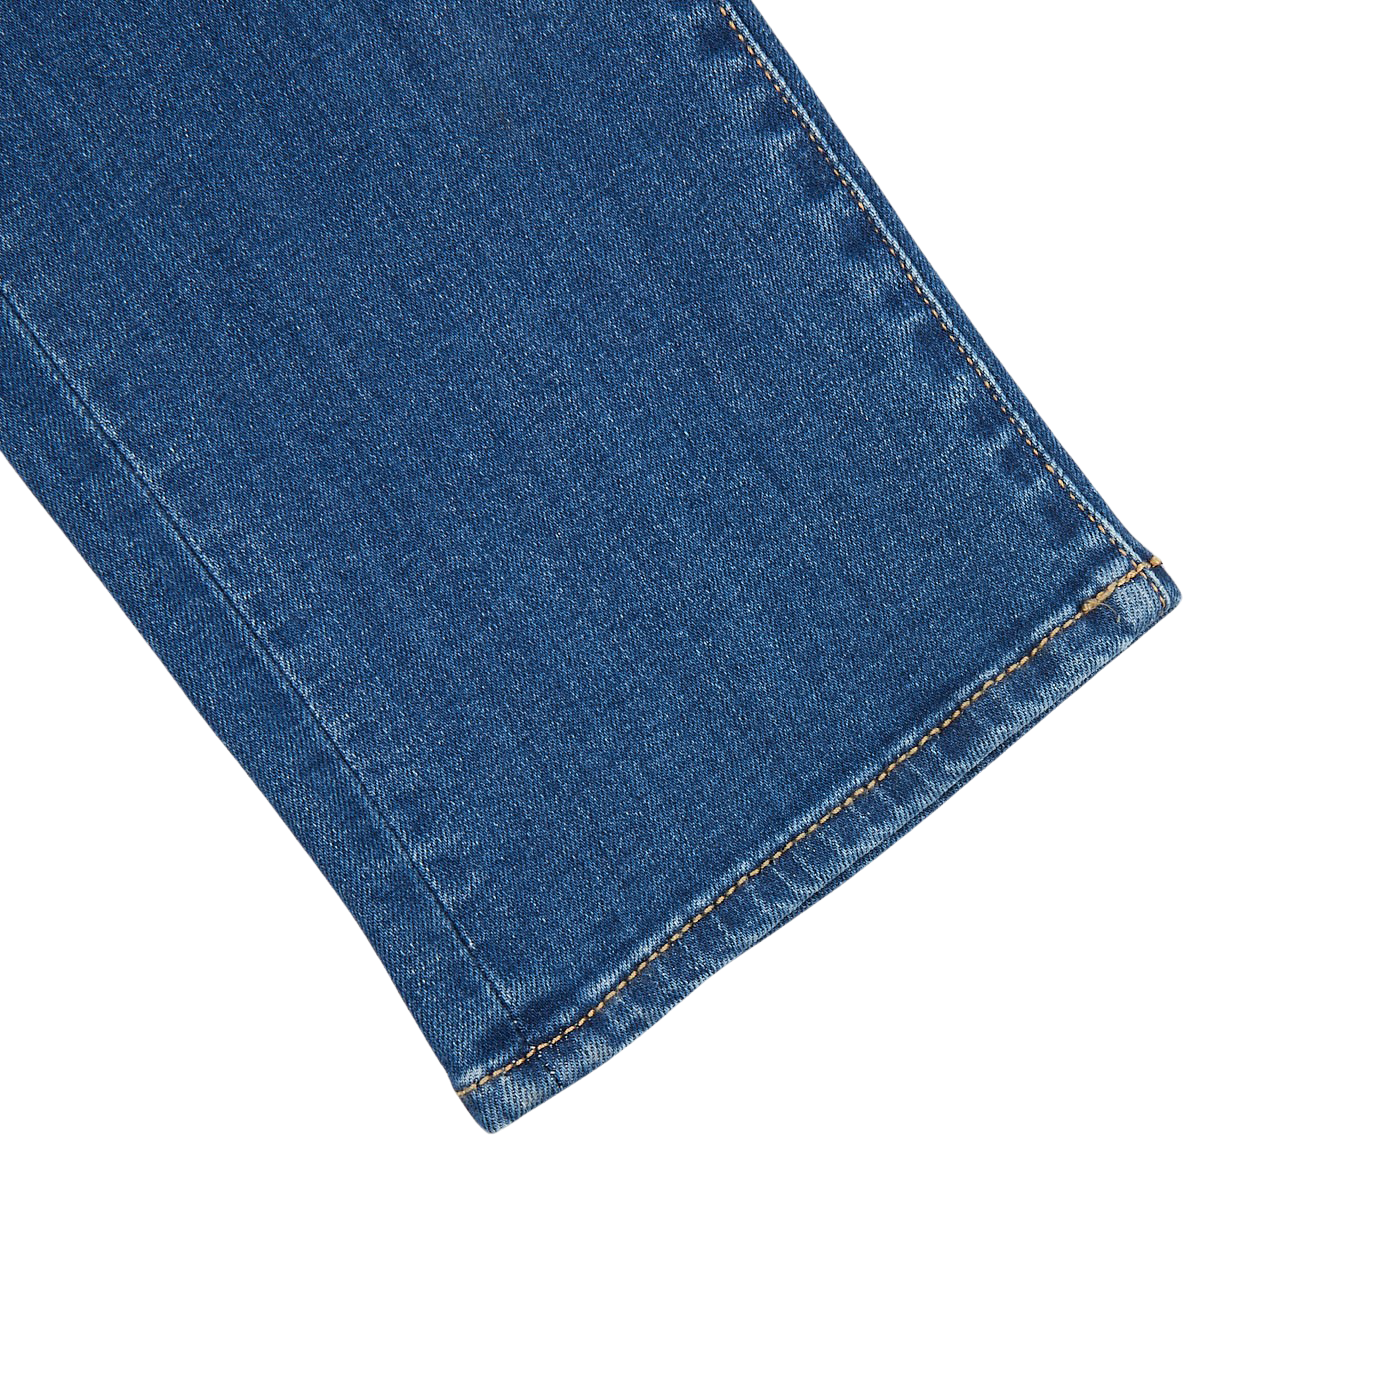 A close up of a comfortable pair of Tramarossa Washed Blue Leonardo 6 Months Jeans.